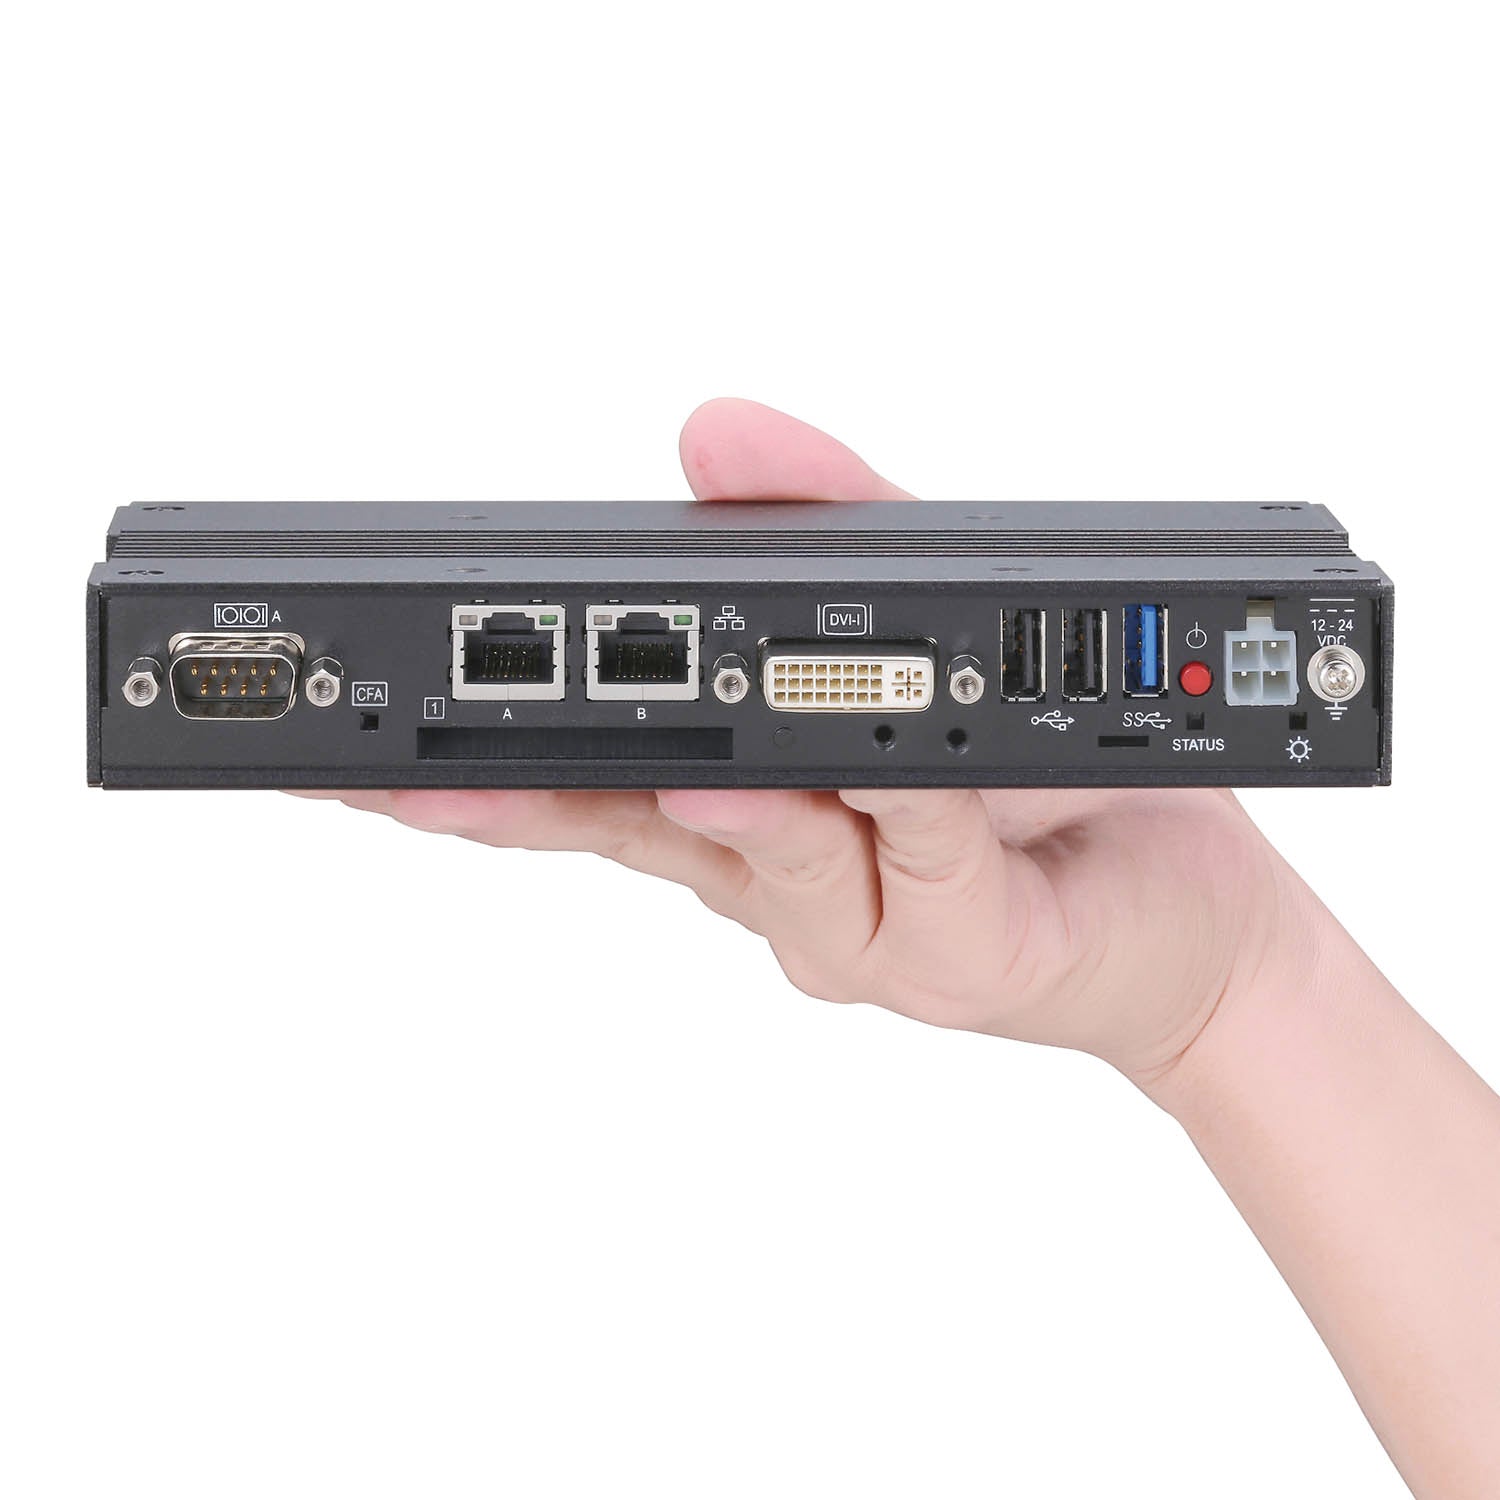 BX-220 Fanless Embedded PC / Thin Client / Intel Atom E3845 (Bay Trail) / 0-60C Operation